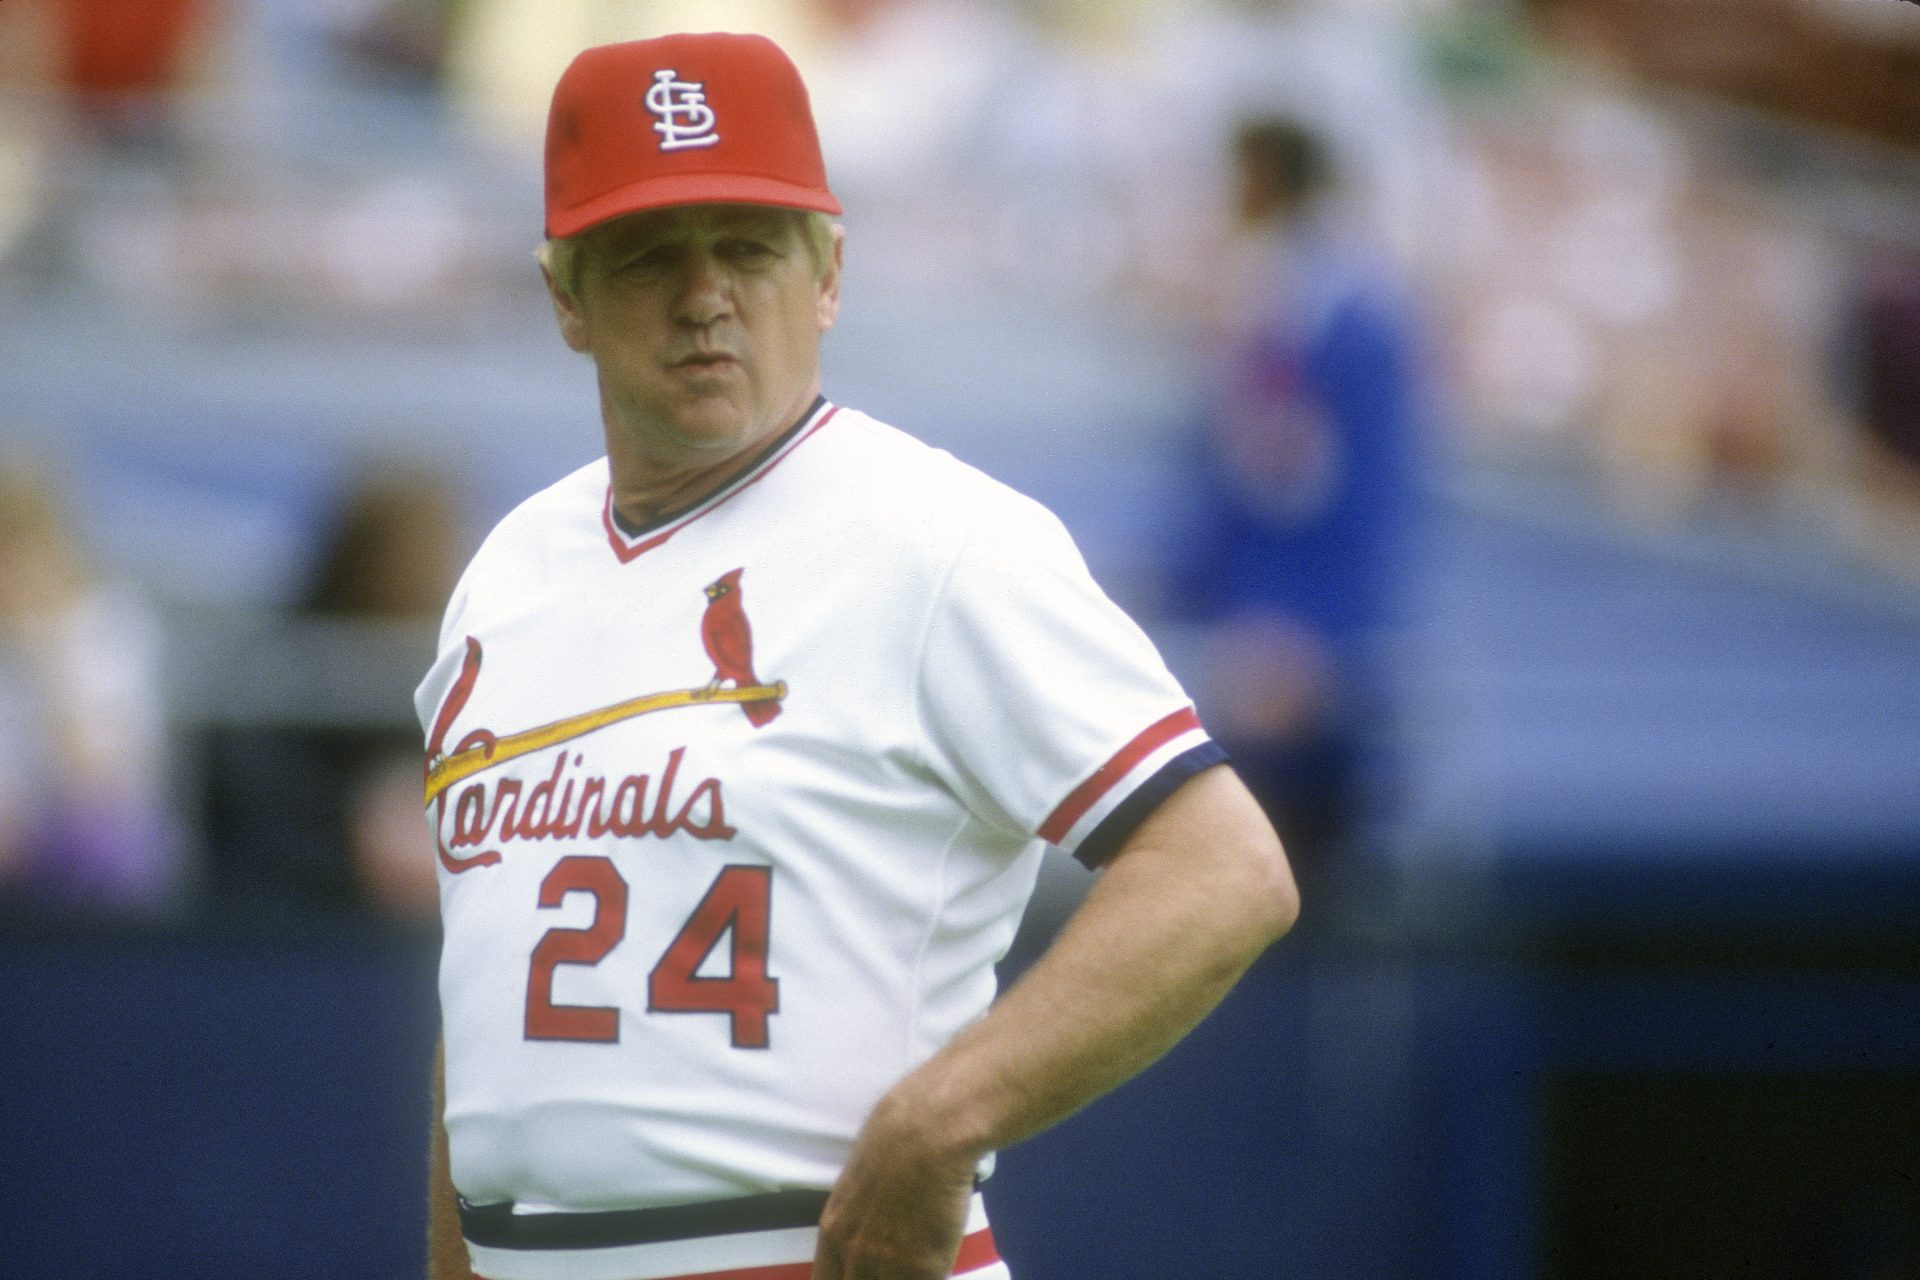 <p>American baseball player Whitey Herzog was 92 years old when he died in St. Louis, Missouri. The Hall of Famer managed the St. Louis Cardinals to the 1982 World Series title "with a style of play known as 'Whiteyball,'" CNN recalls.</p>